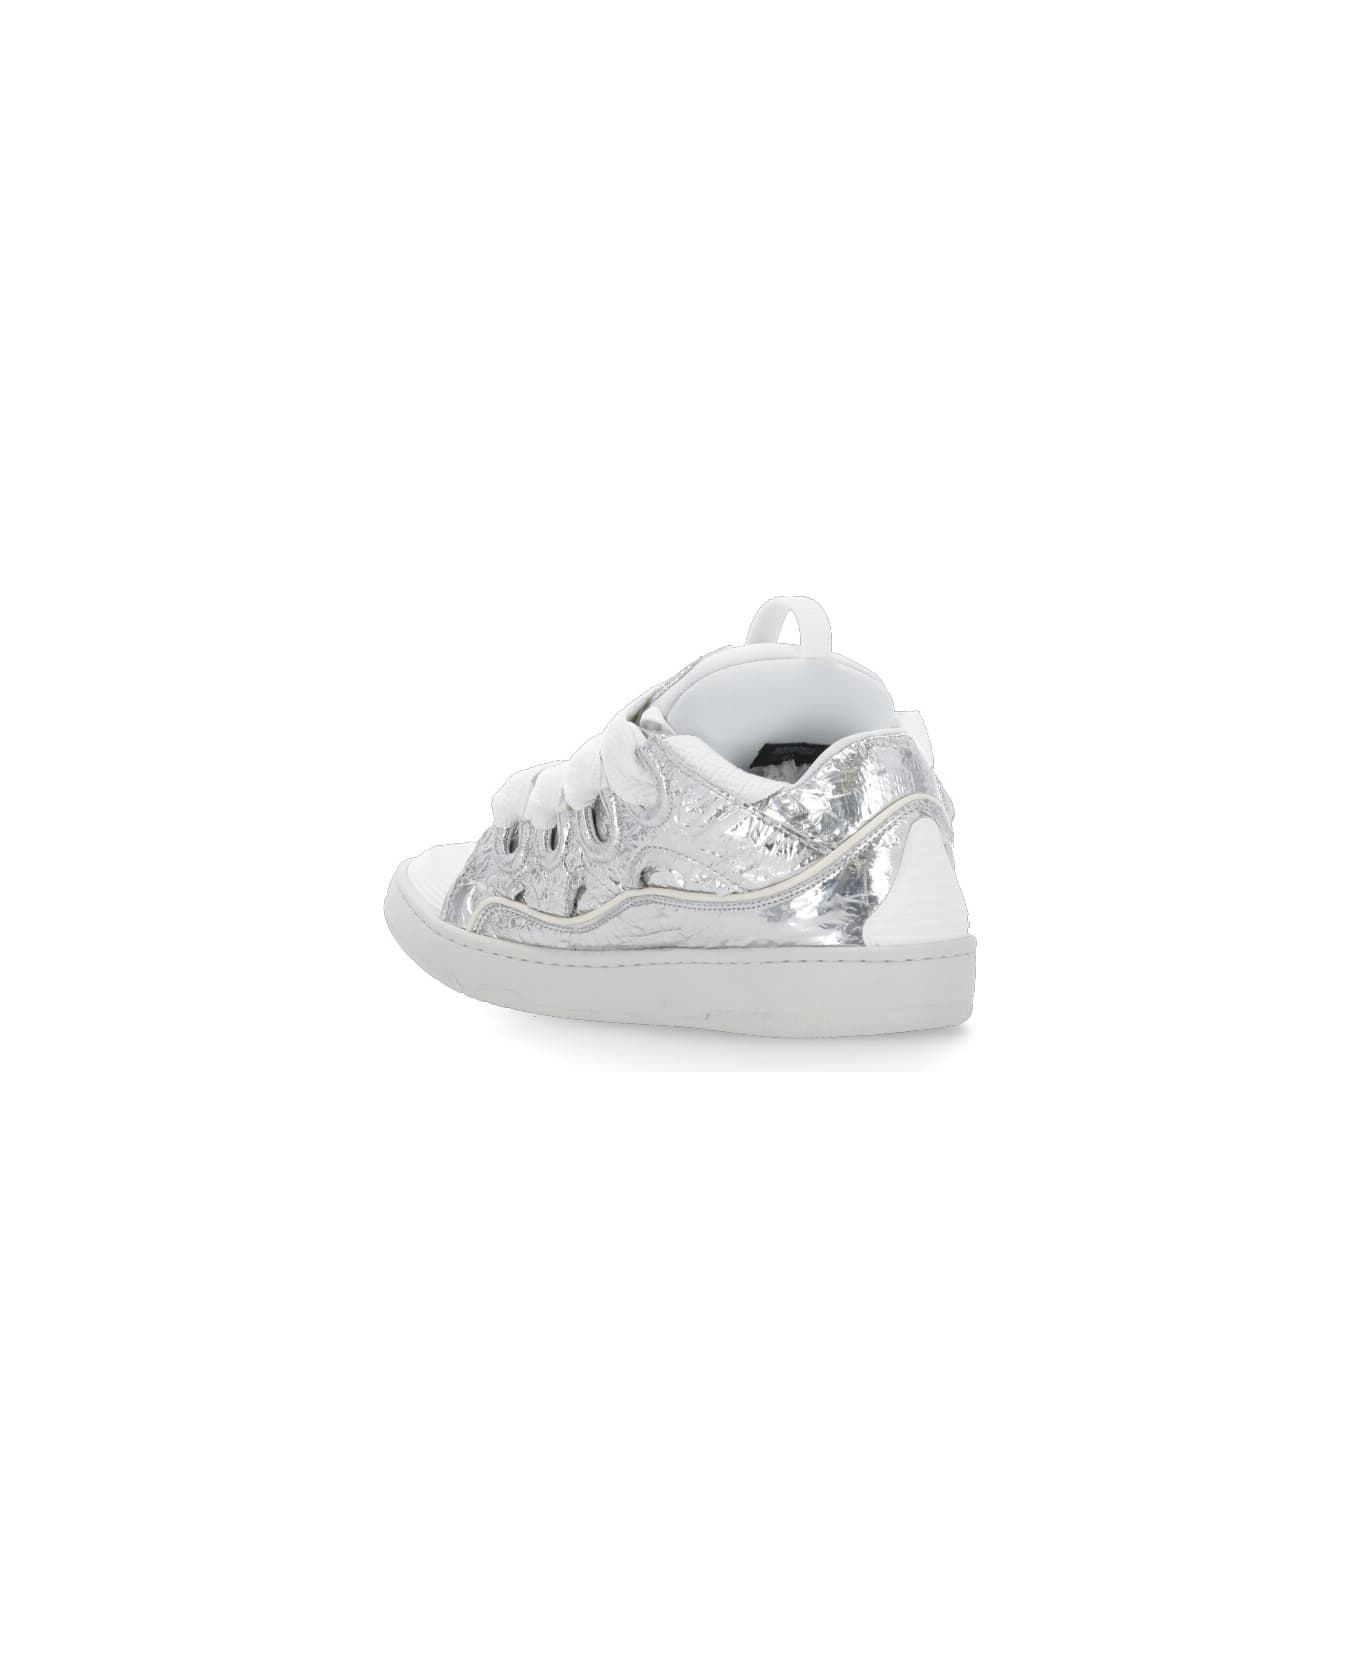 Lanvin Curb Sneakers - Silver スニーカー